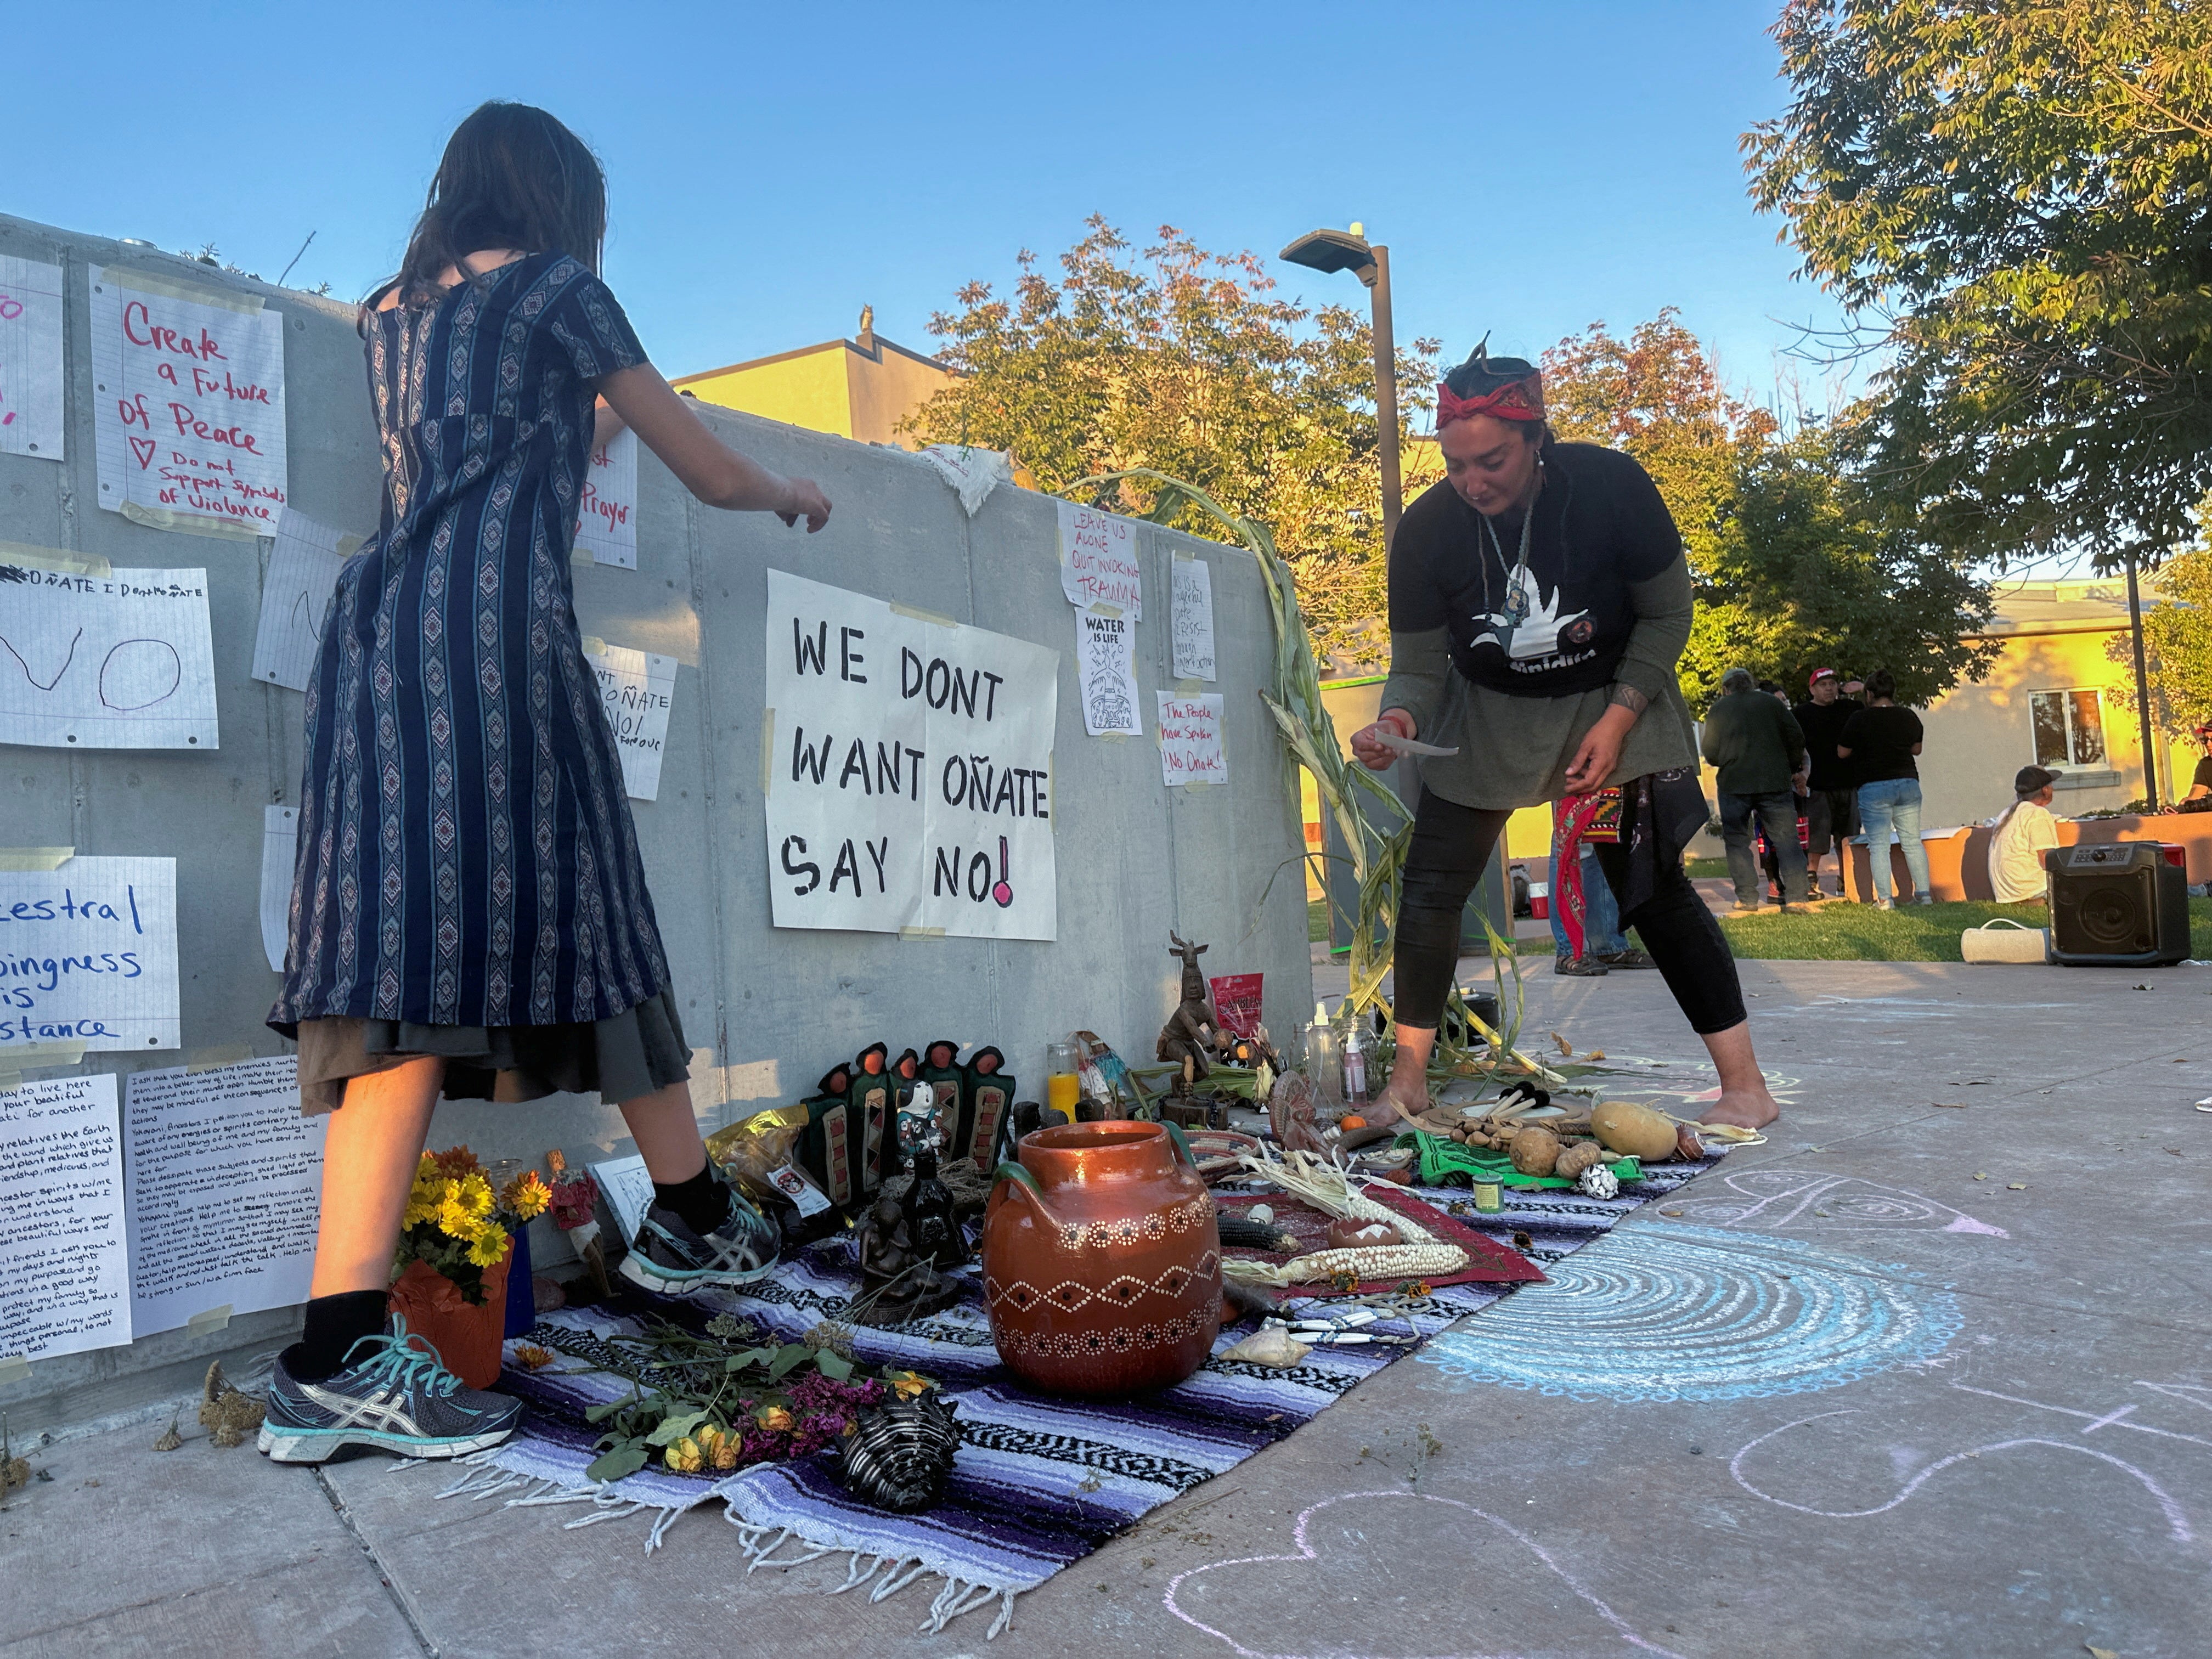 Ixchel Topete and her mother Soula Topete arrange an altar in front of a concrete platform where authorities had planned to reinstall a statue of conquistador Juan de Onate but postponed the event after protests, at the Rio Arriba County Complex in Espanola